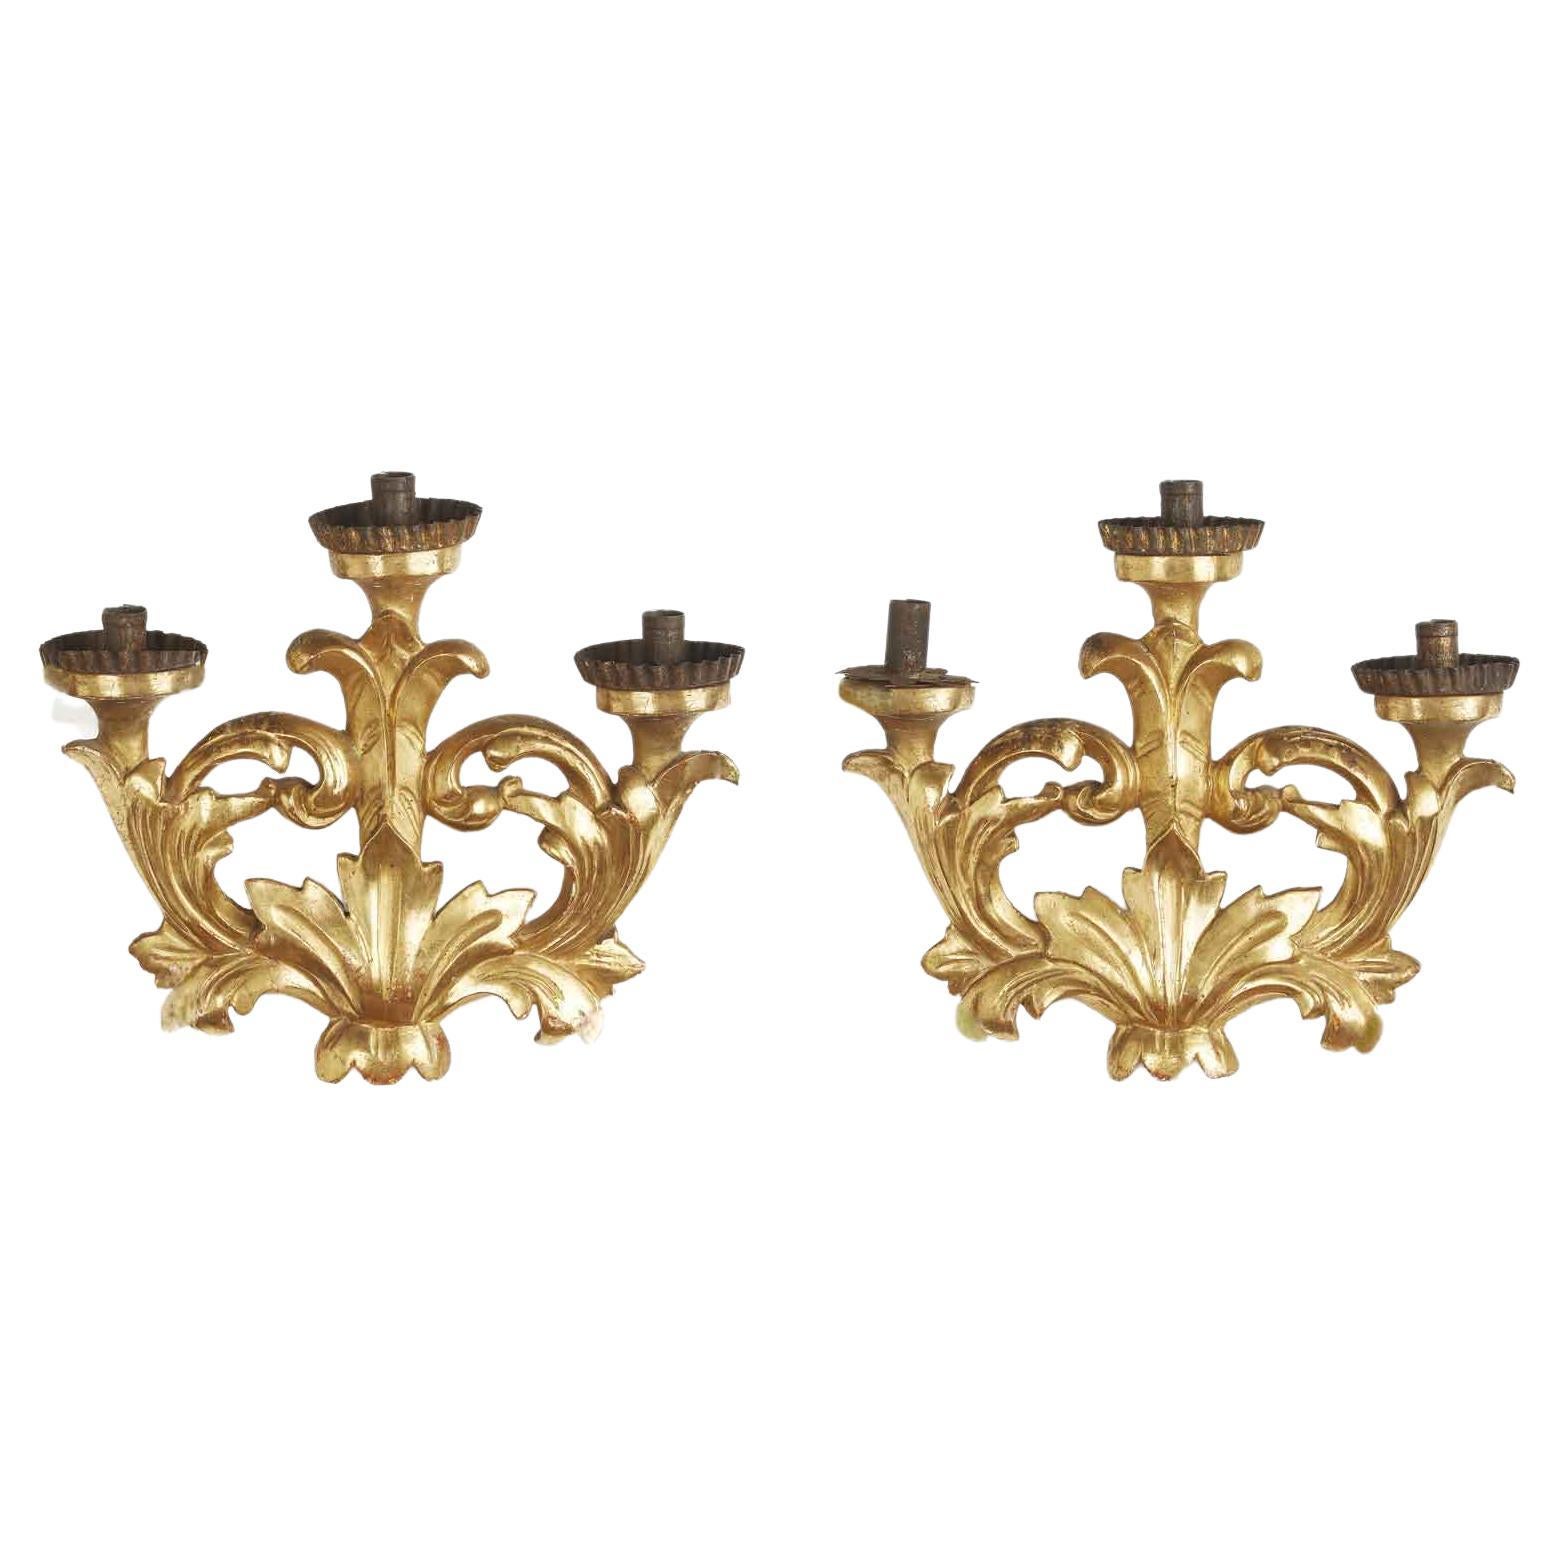 Pair of Italian Baroque Giltwood Wall Candelabra 19th Century Carved Sconces